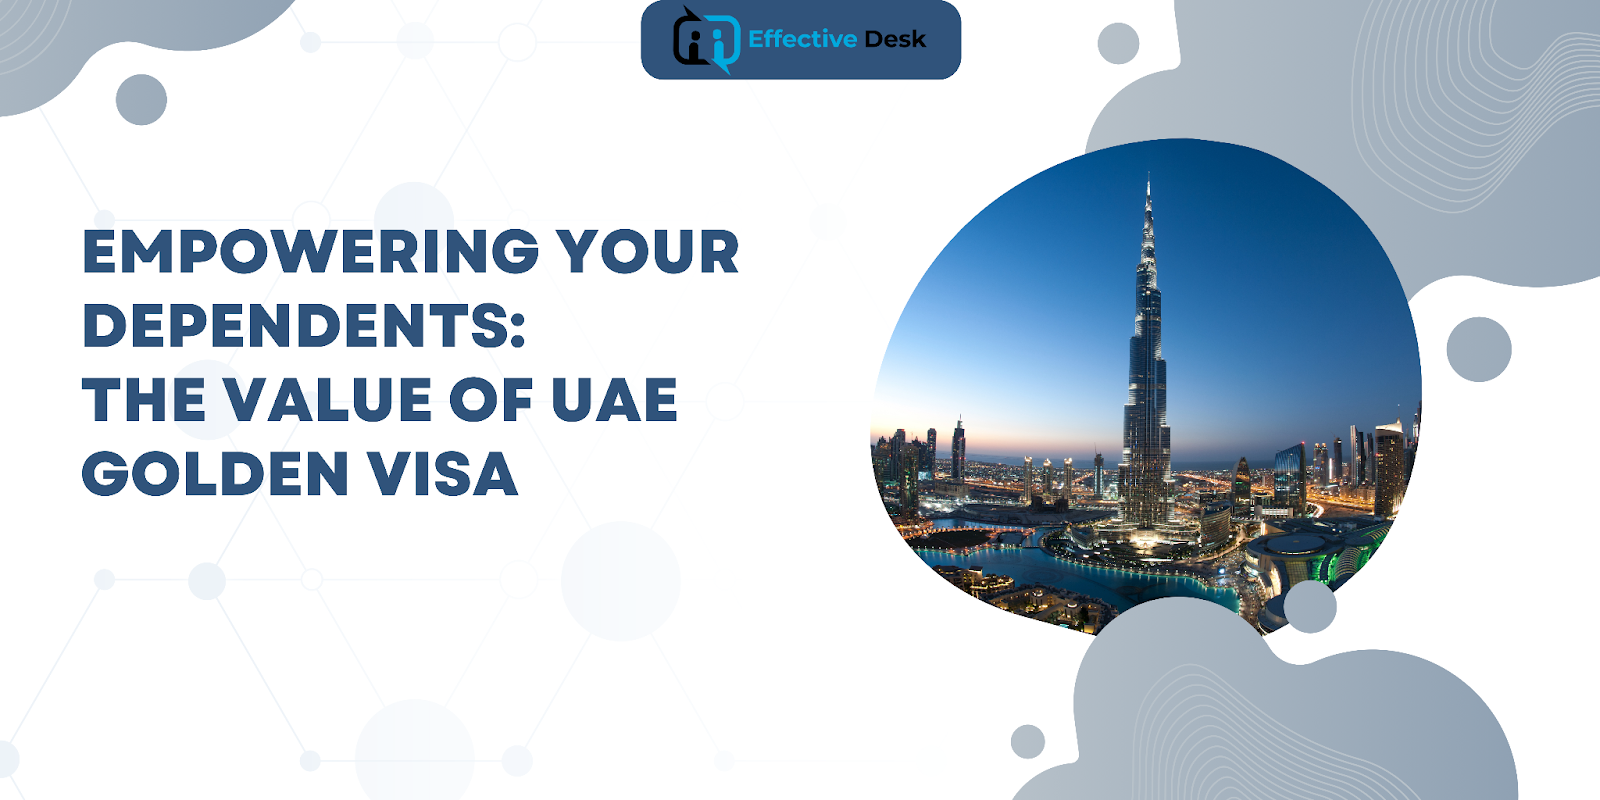 Empowering Your Dependents: The Value of UAE Golden Visa
